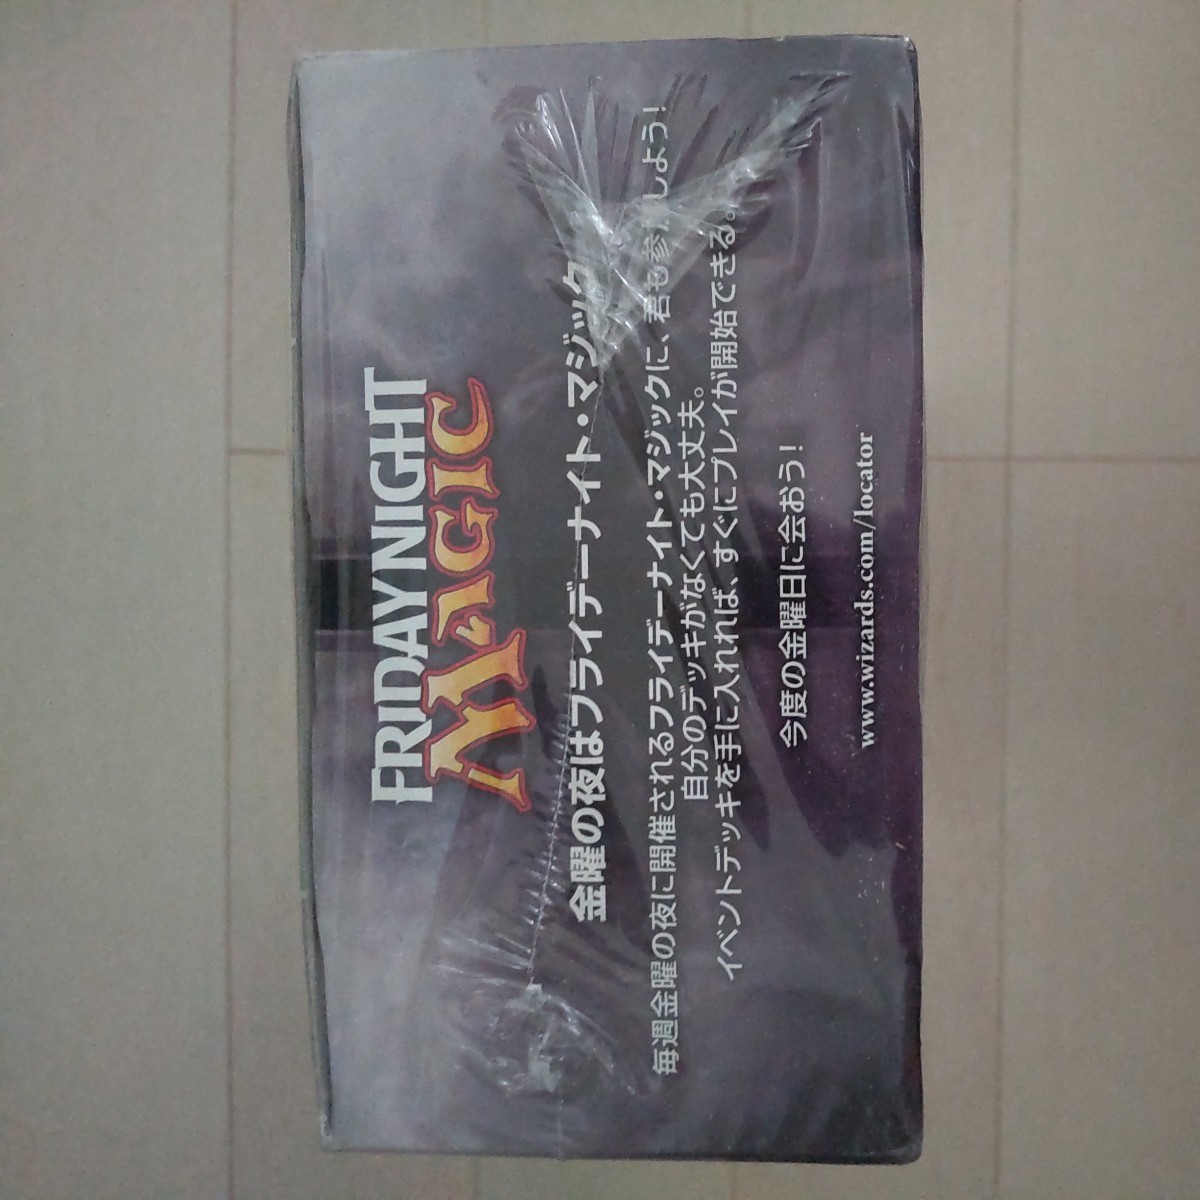 MTG Magic : The *gya The ring (36 pack ){.. .. booster BOX Japanese edition }[DKA] new goods unopened 